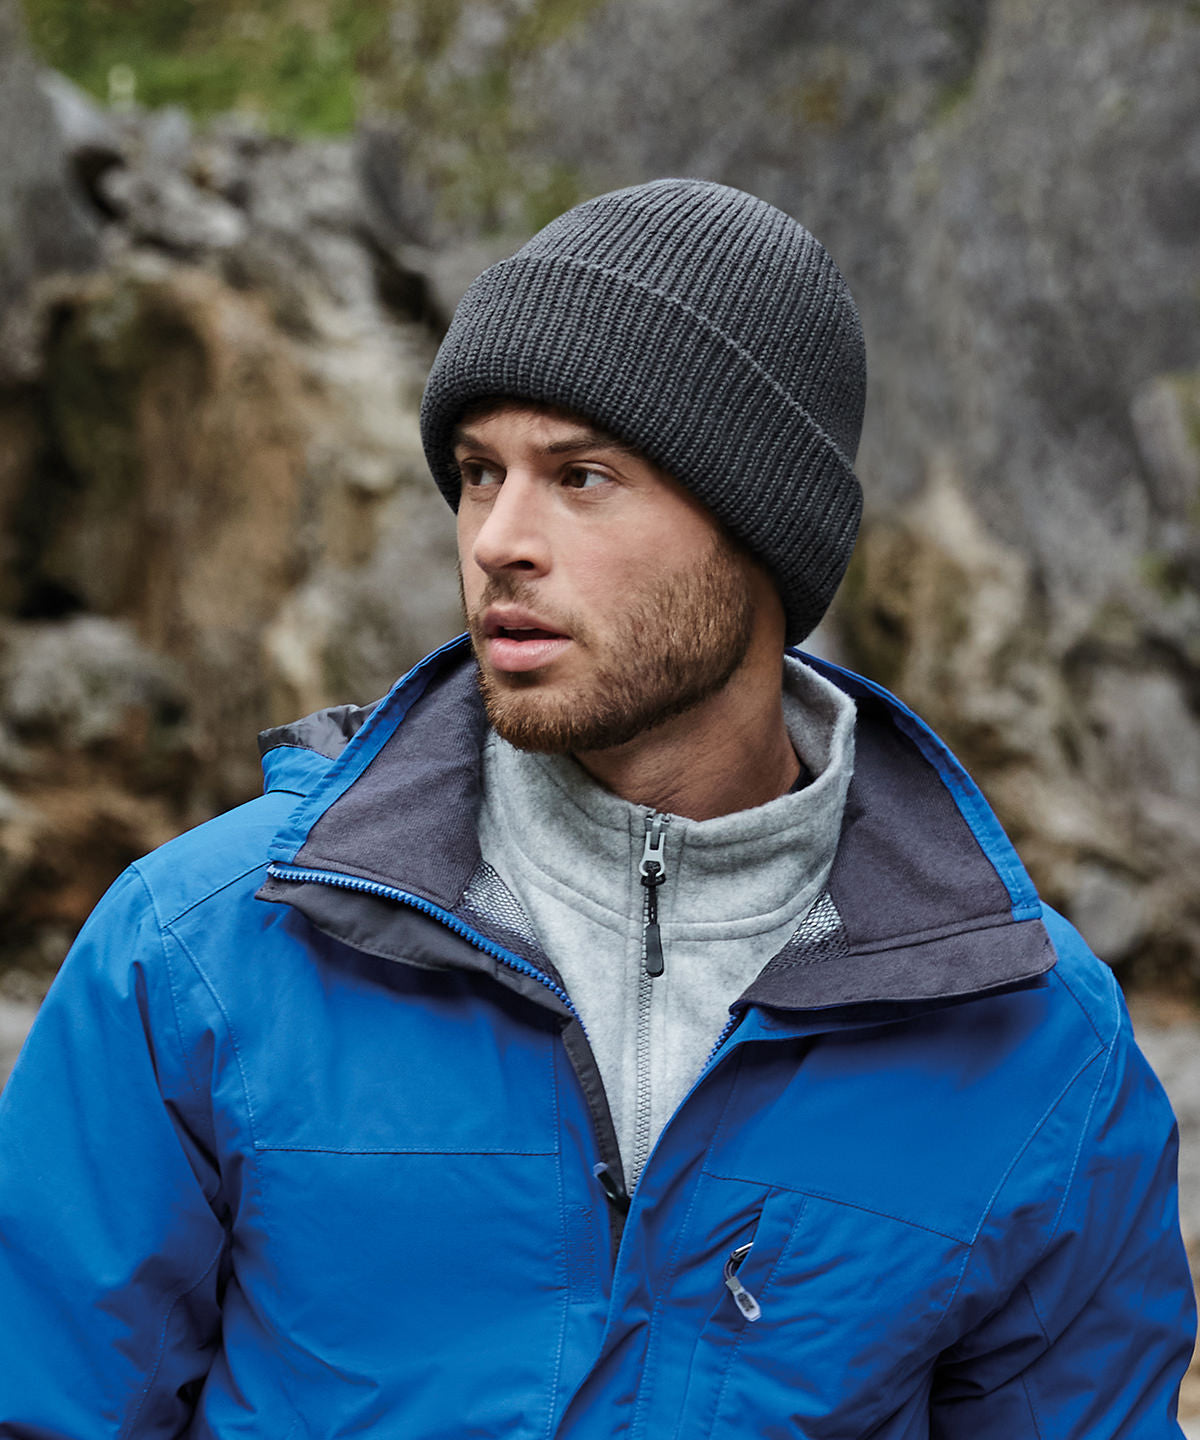 Beechfield Water-Repellent Thermal Elements Beanie